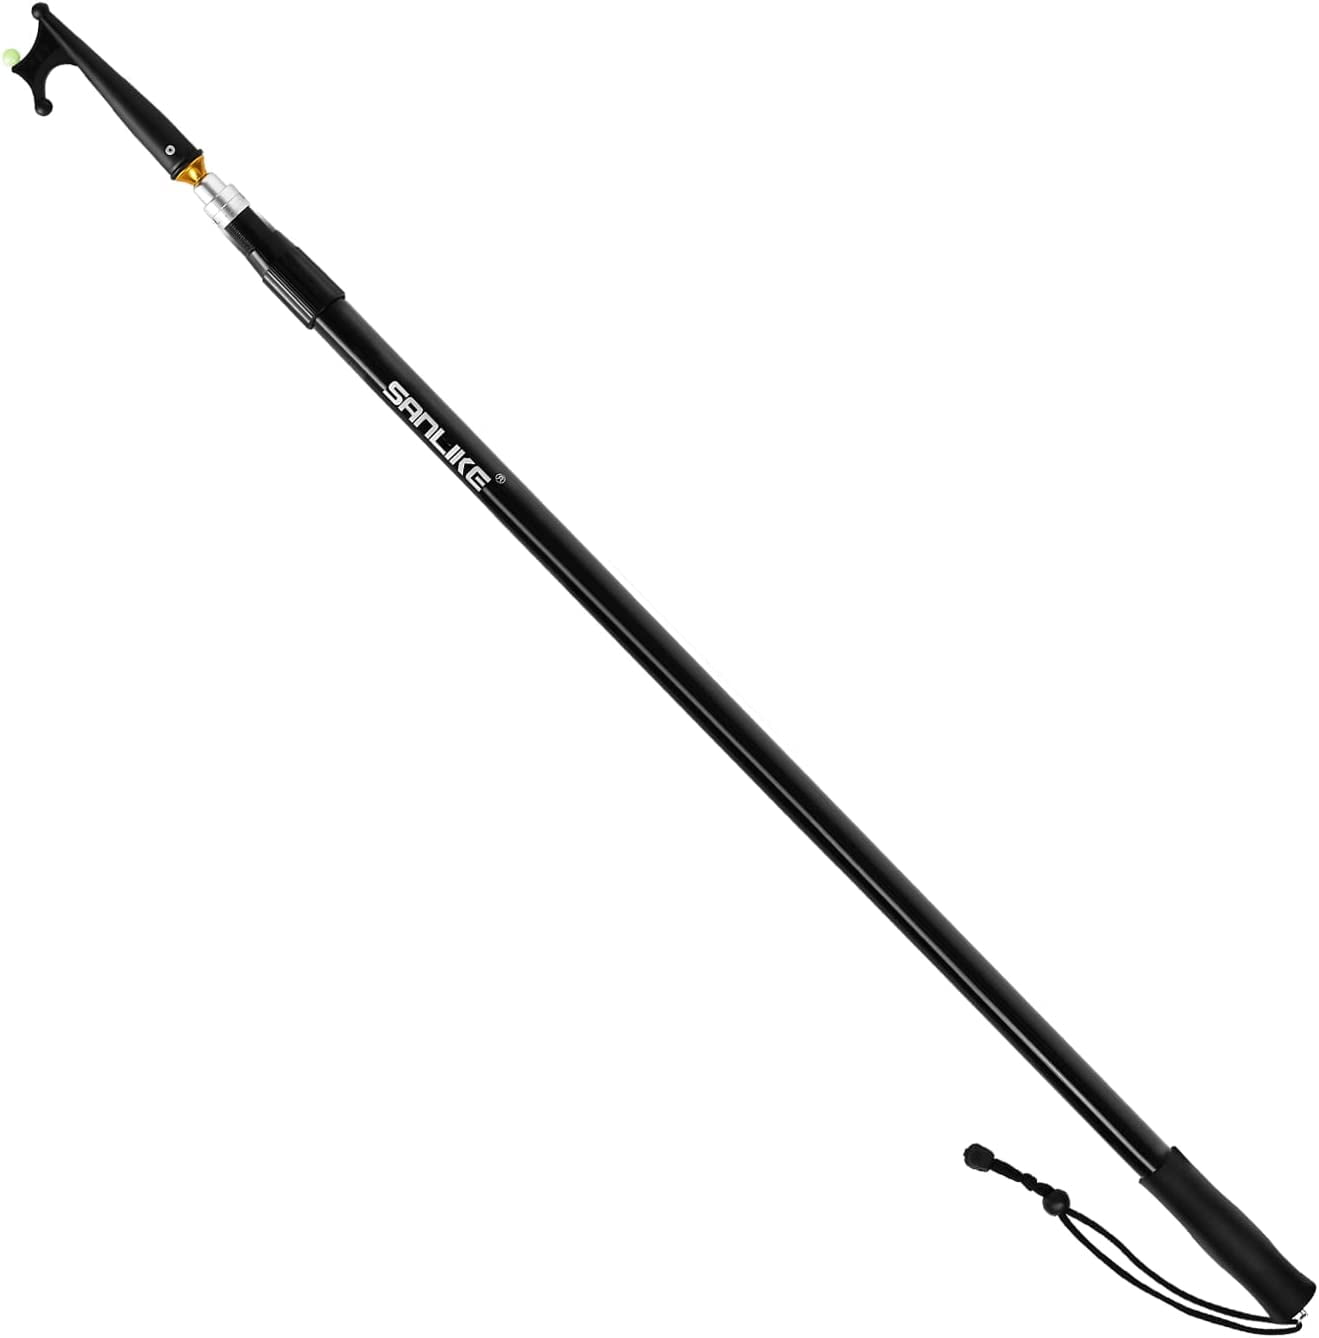 San Like Telescoping Boat Hooks Adjustable Boat Hook Pole 11.2ft- Floating,Durable,Rust-Resistant with Luminous Bead,Push Pole for Docking&Balck, Size